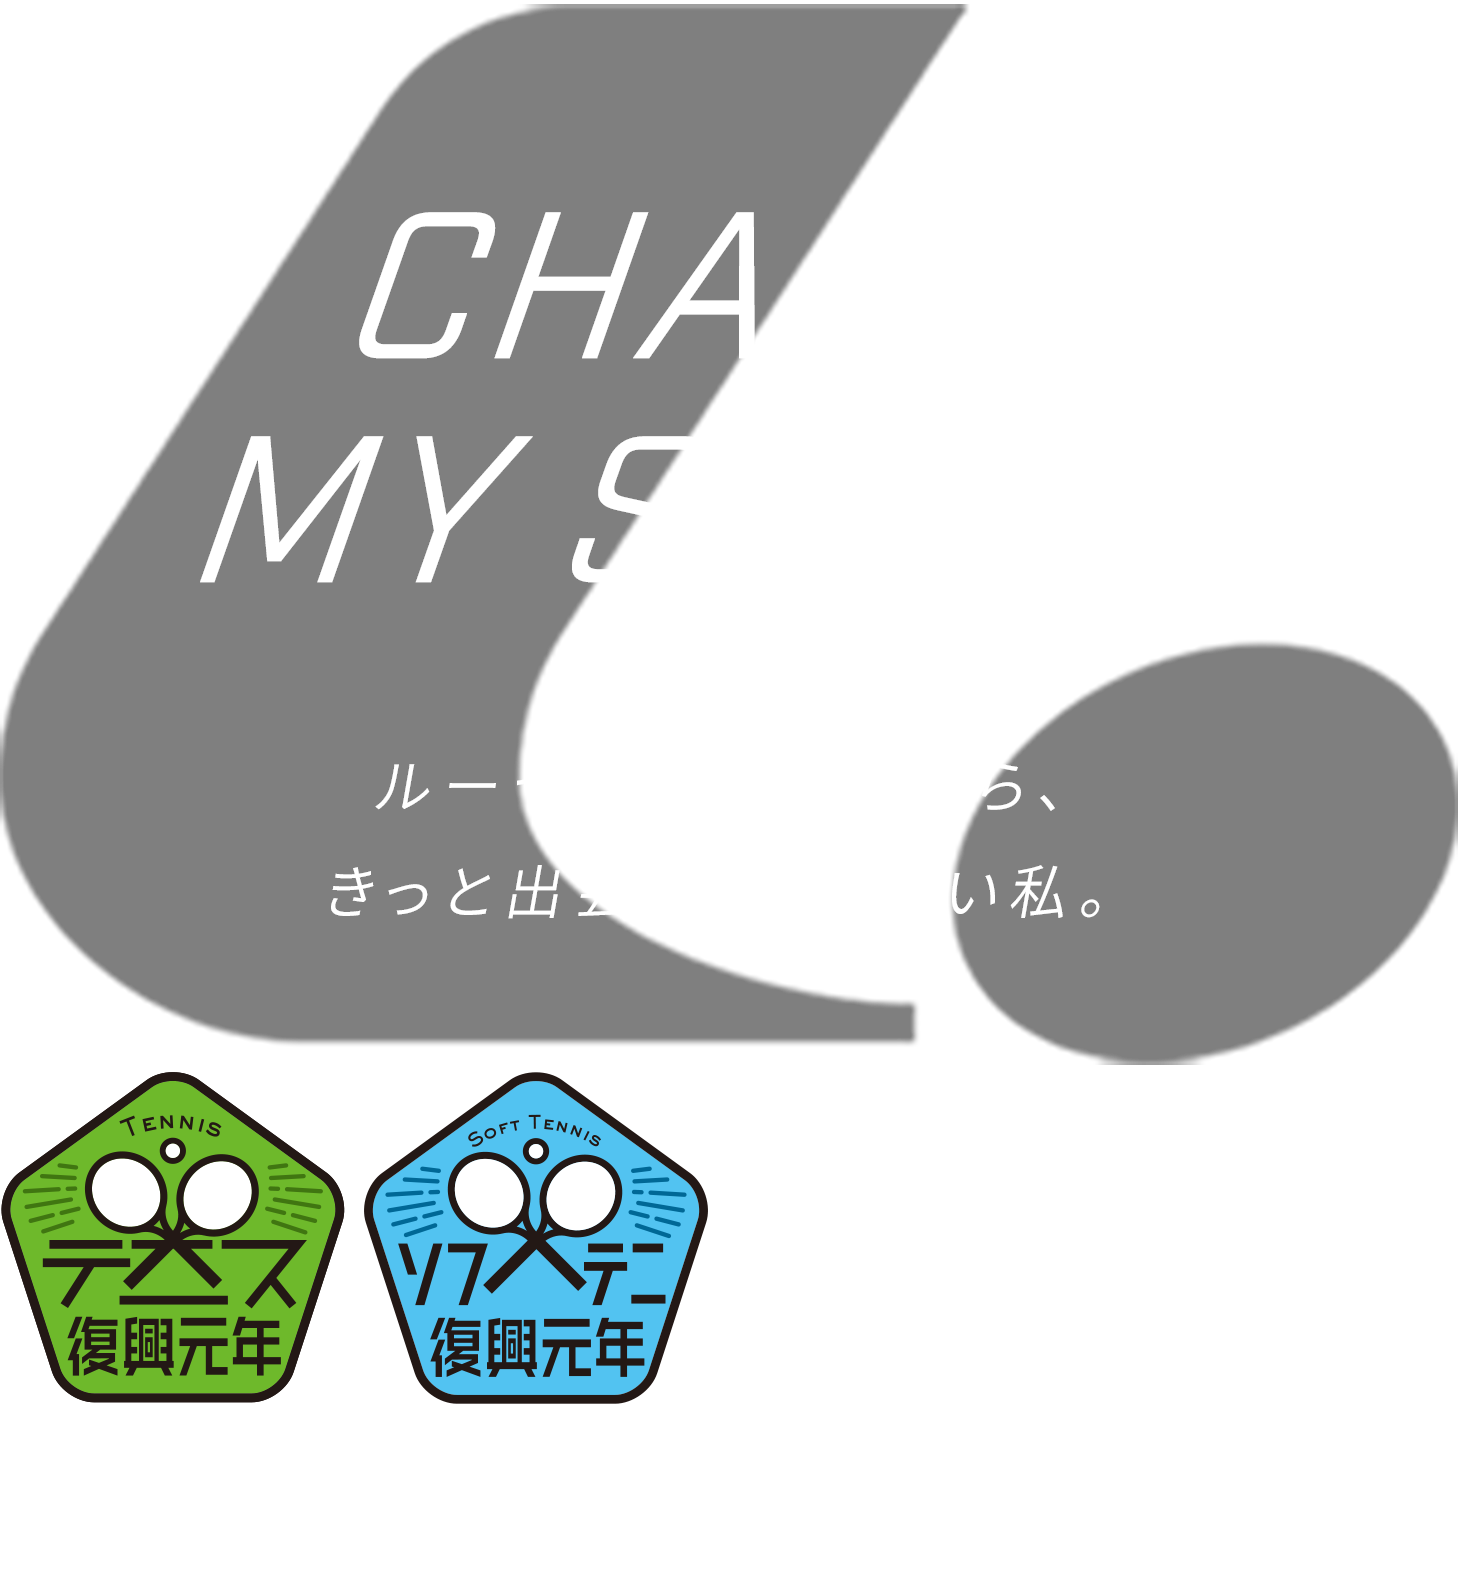 CAHCGE YOUR STYLE ルーセントが一緒ならきっと出会える、新しい私。